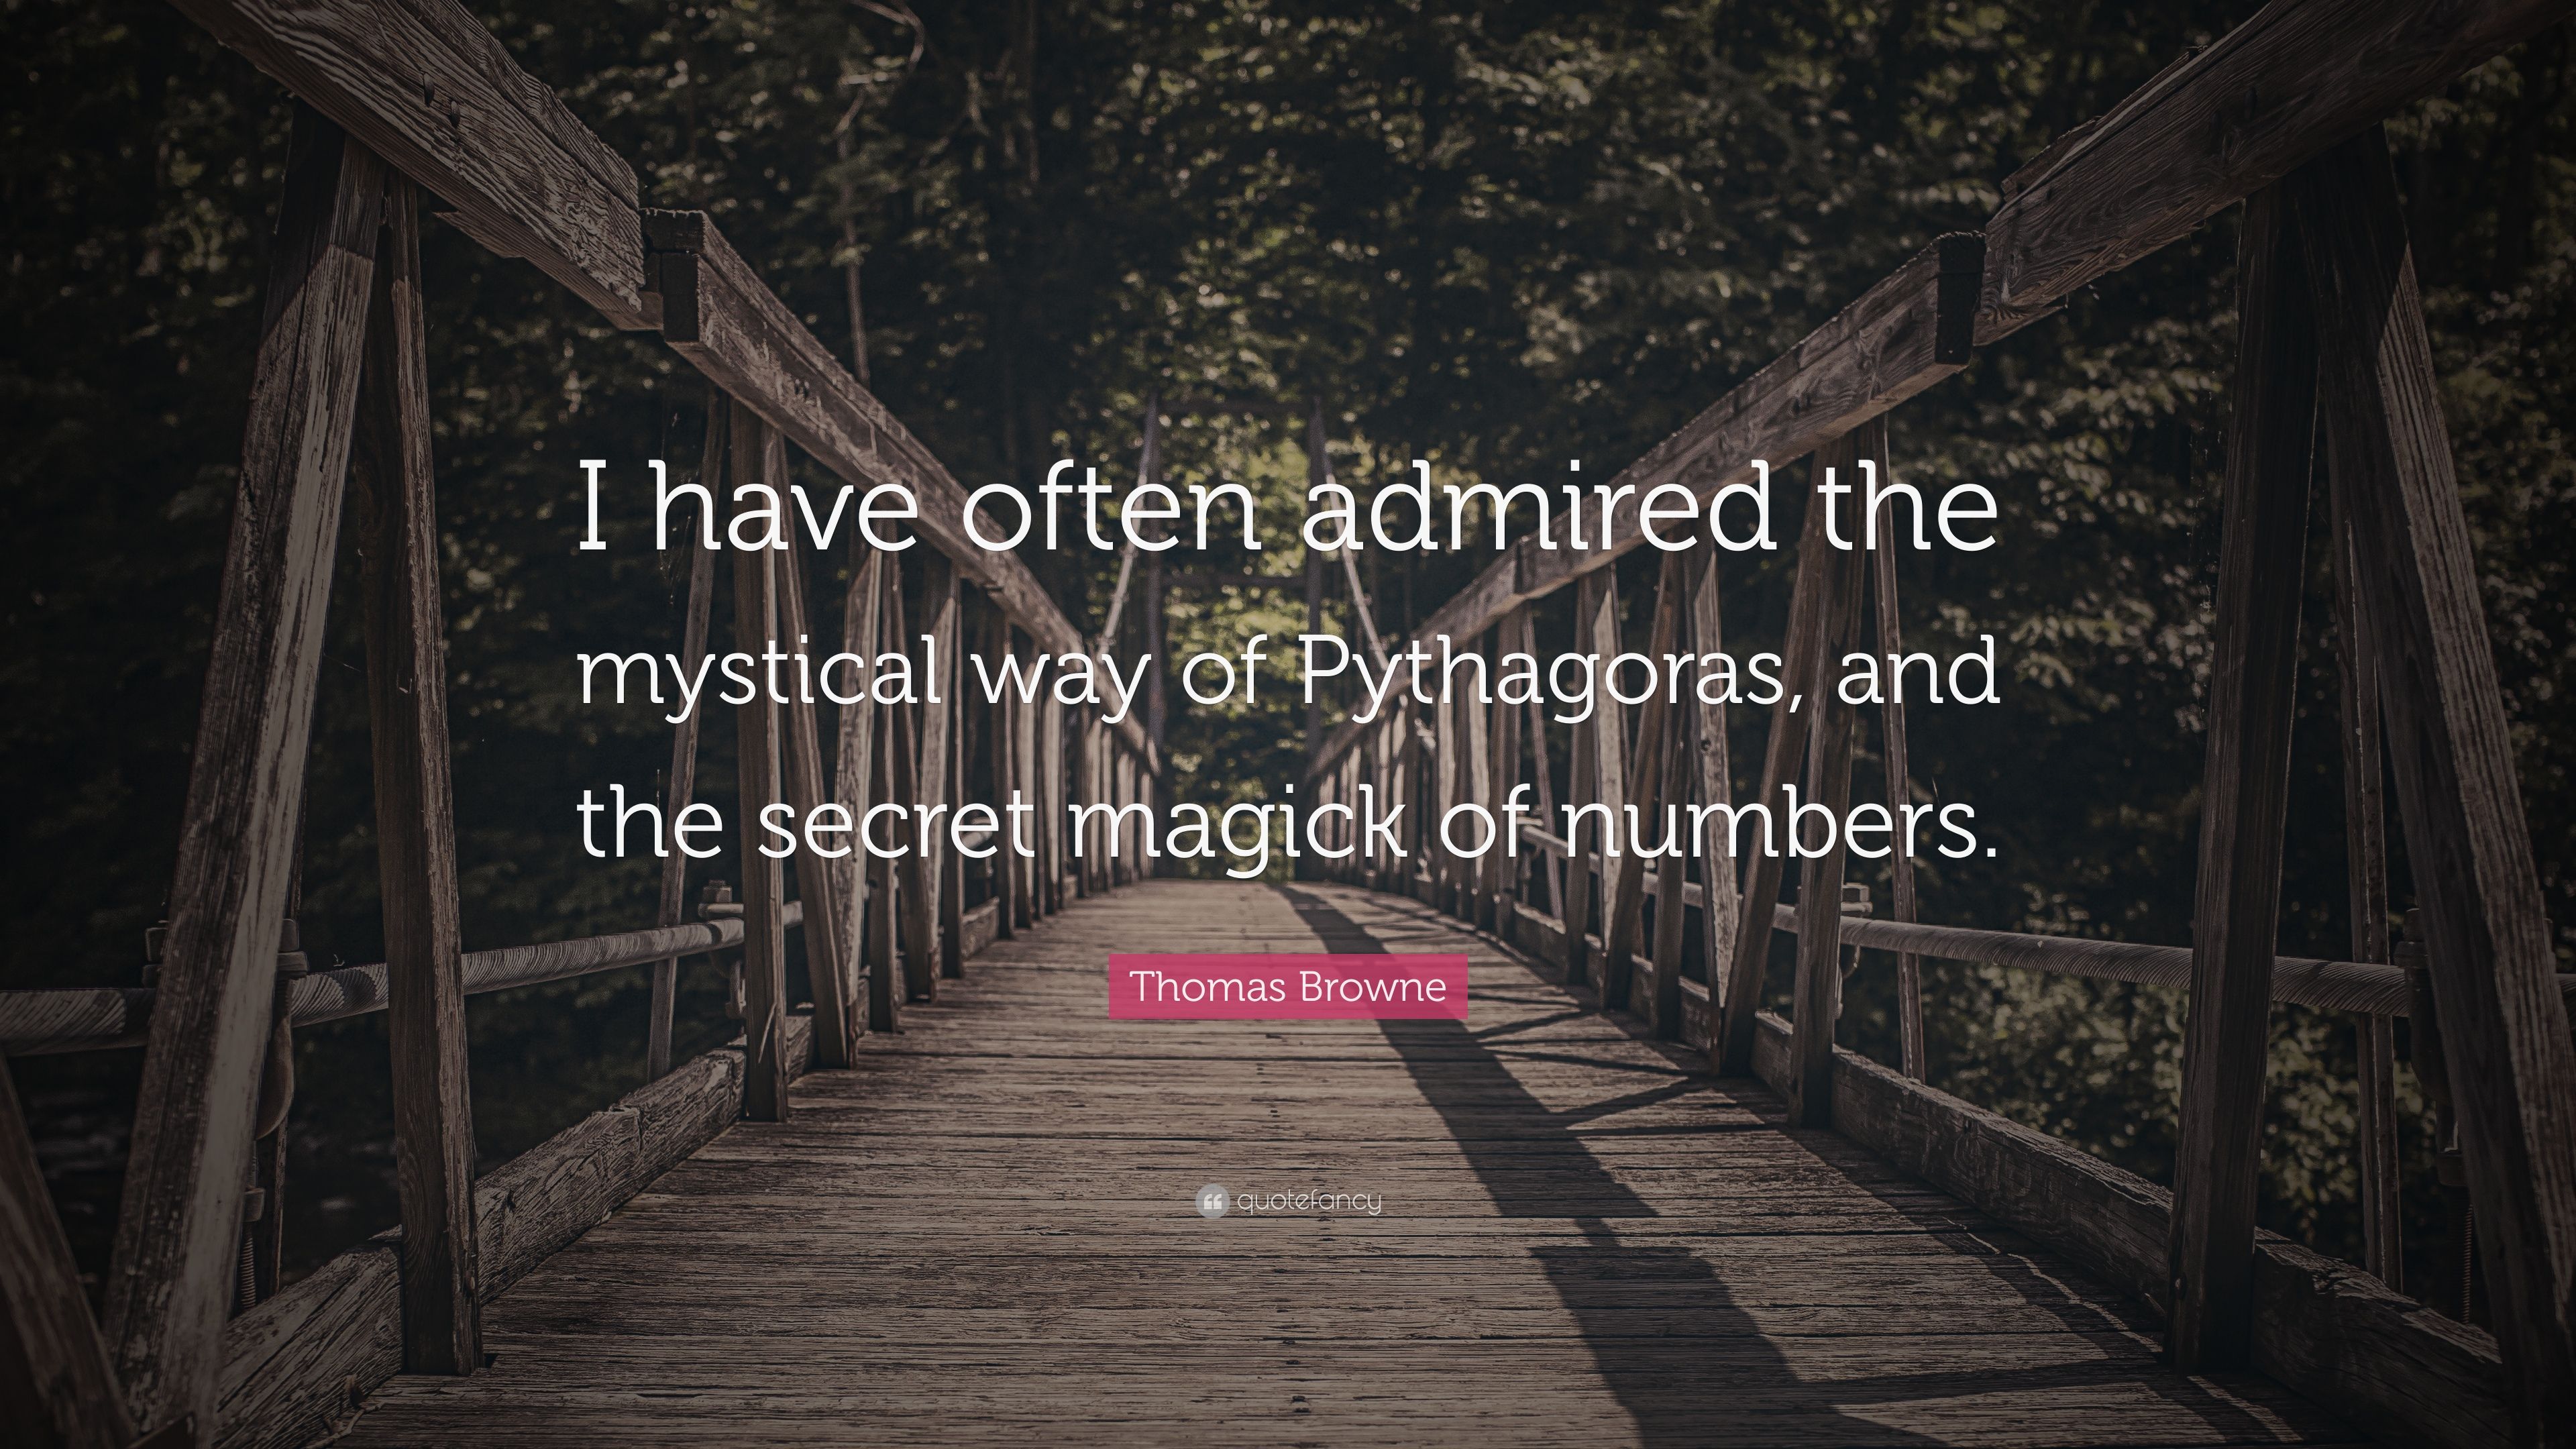 Thomas Browne Quote: “I have often admired the mystical way